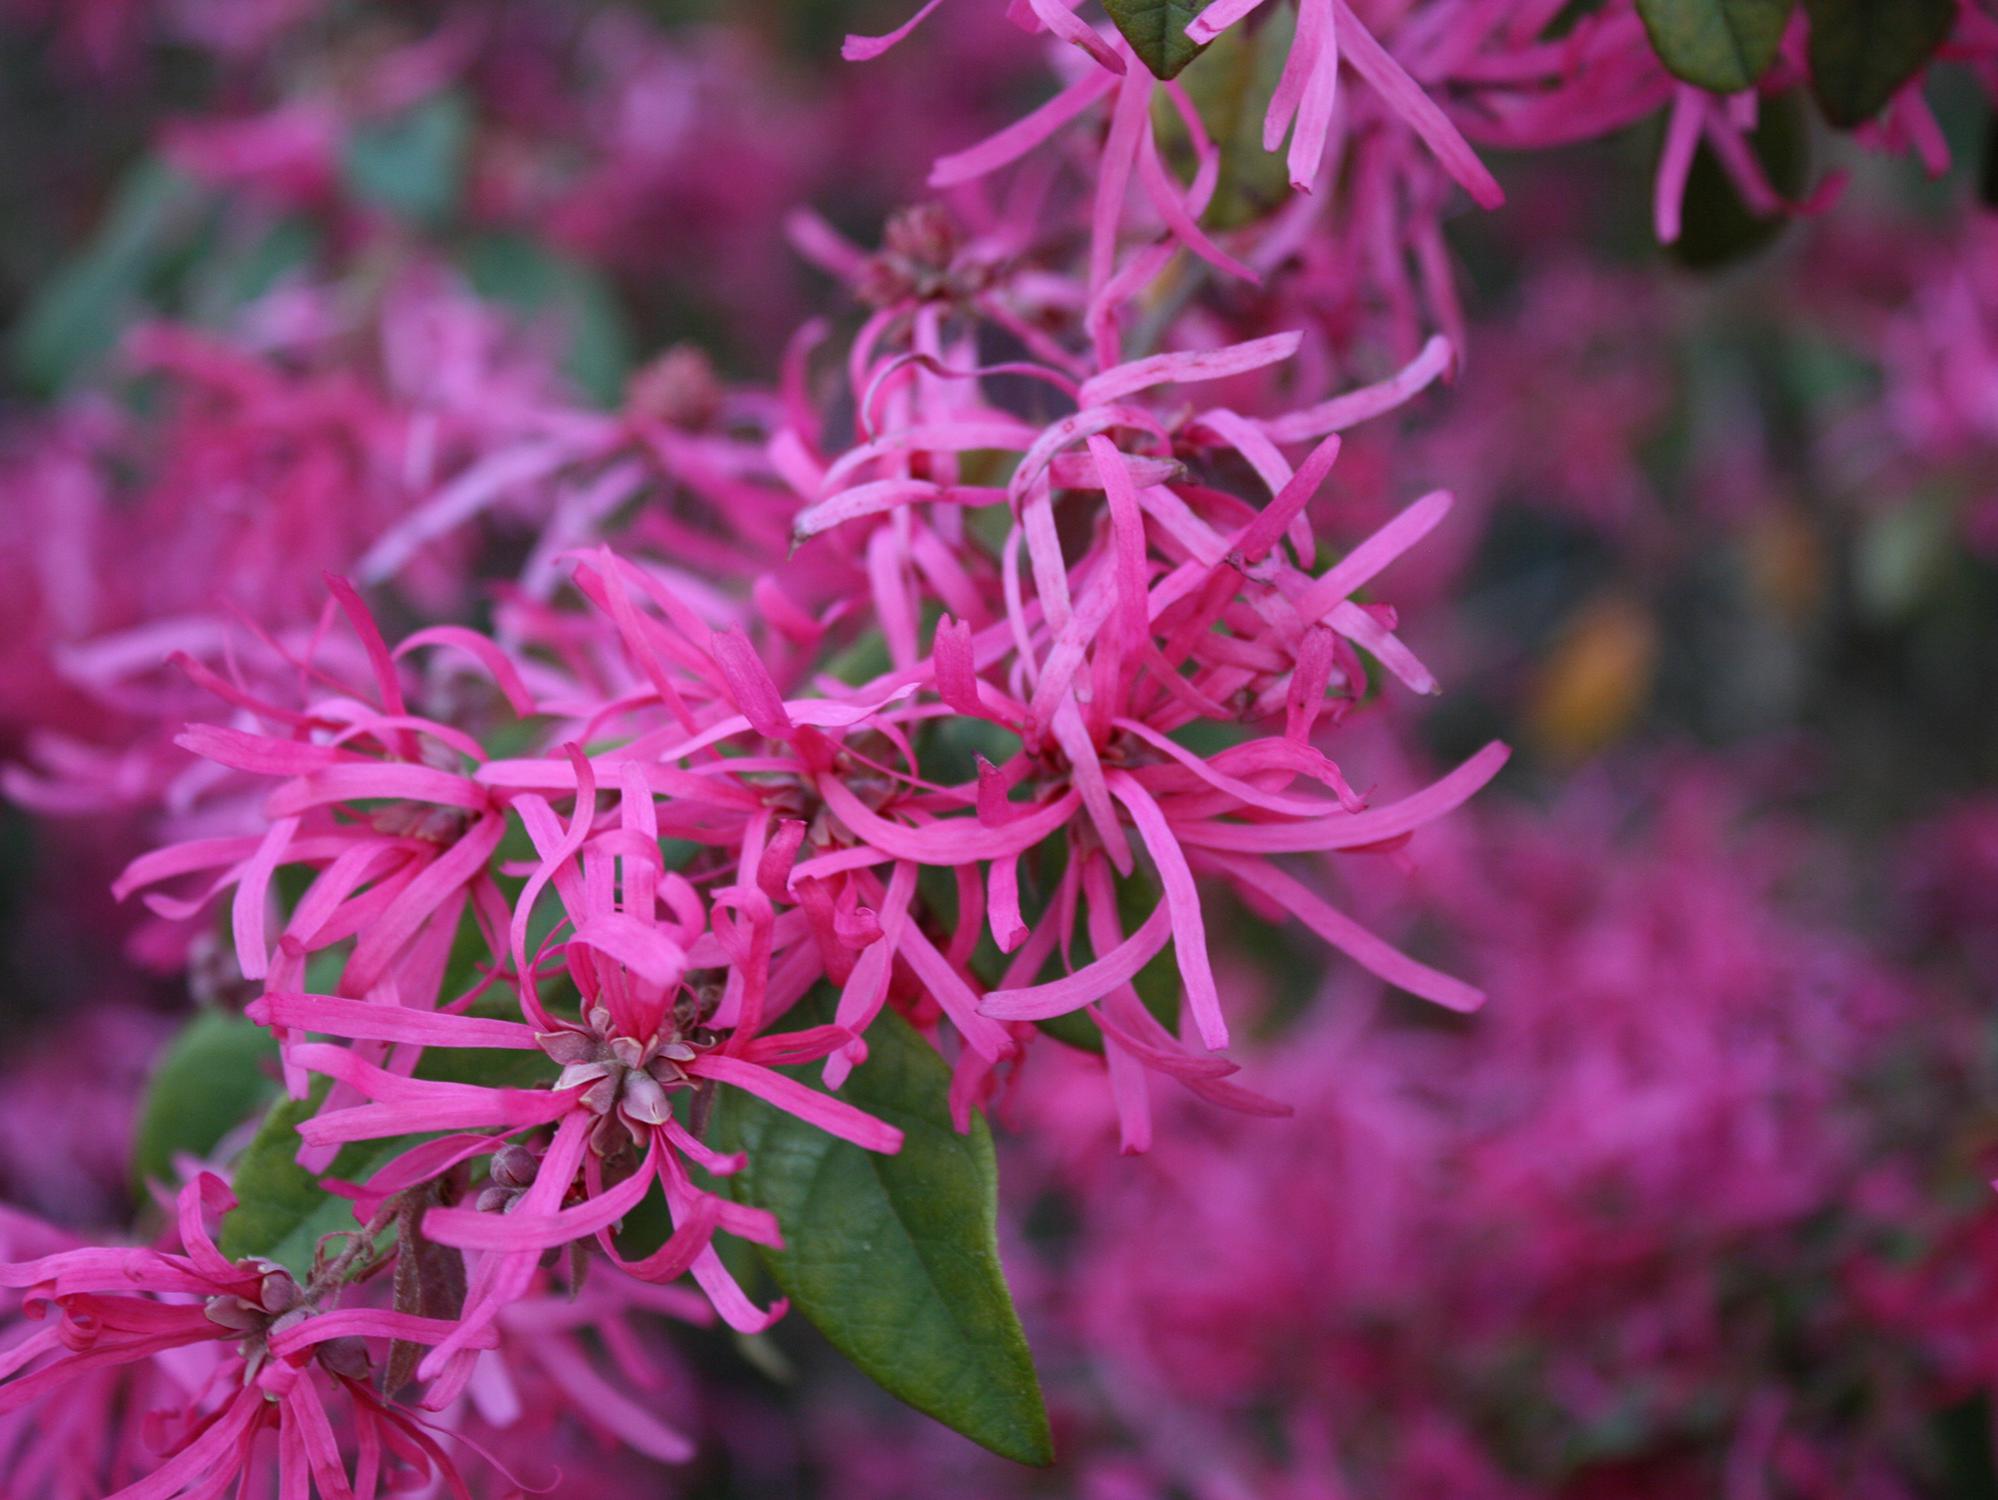 Deep pink blossoms cover the mostly bare branches of a shrub.